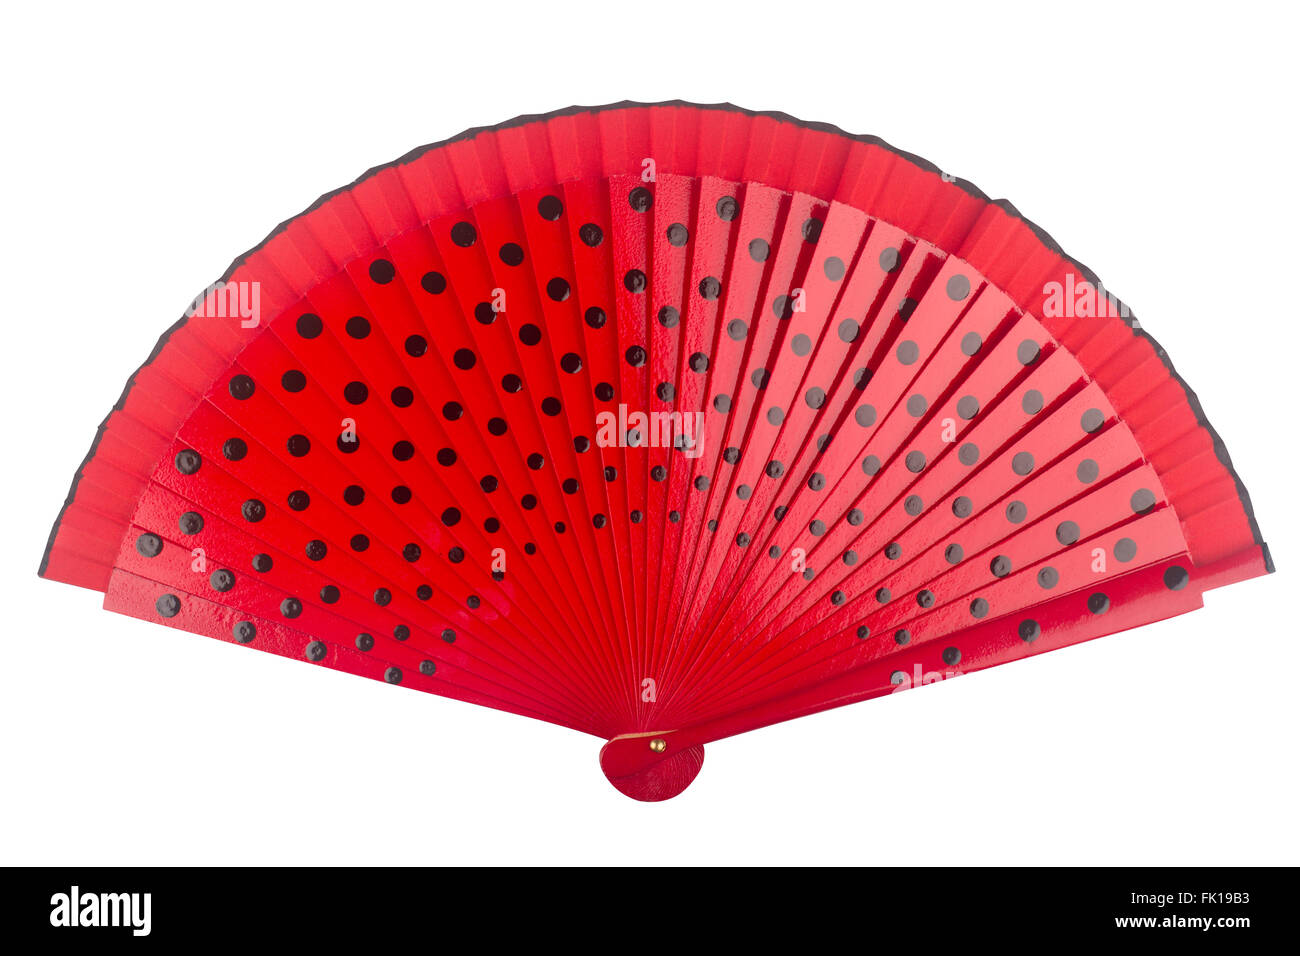 Open red fan with black dots isolated on white background Stock Photo